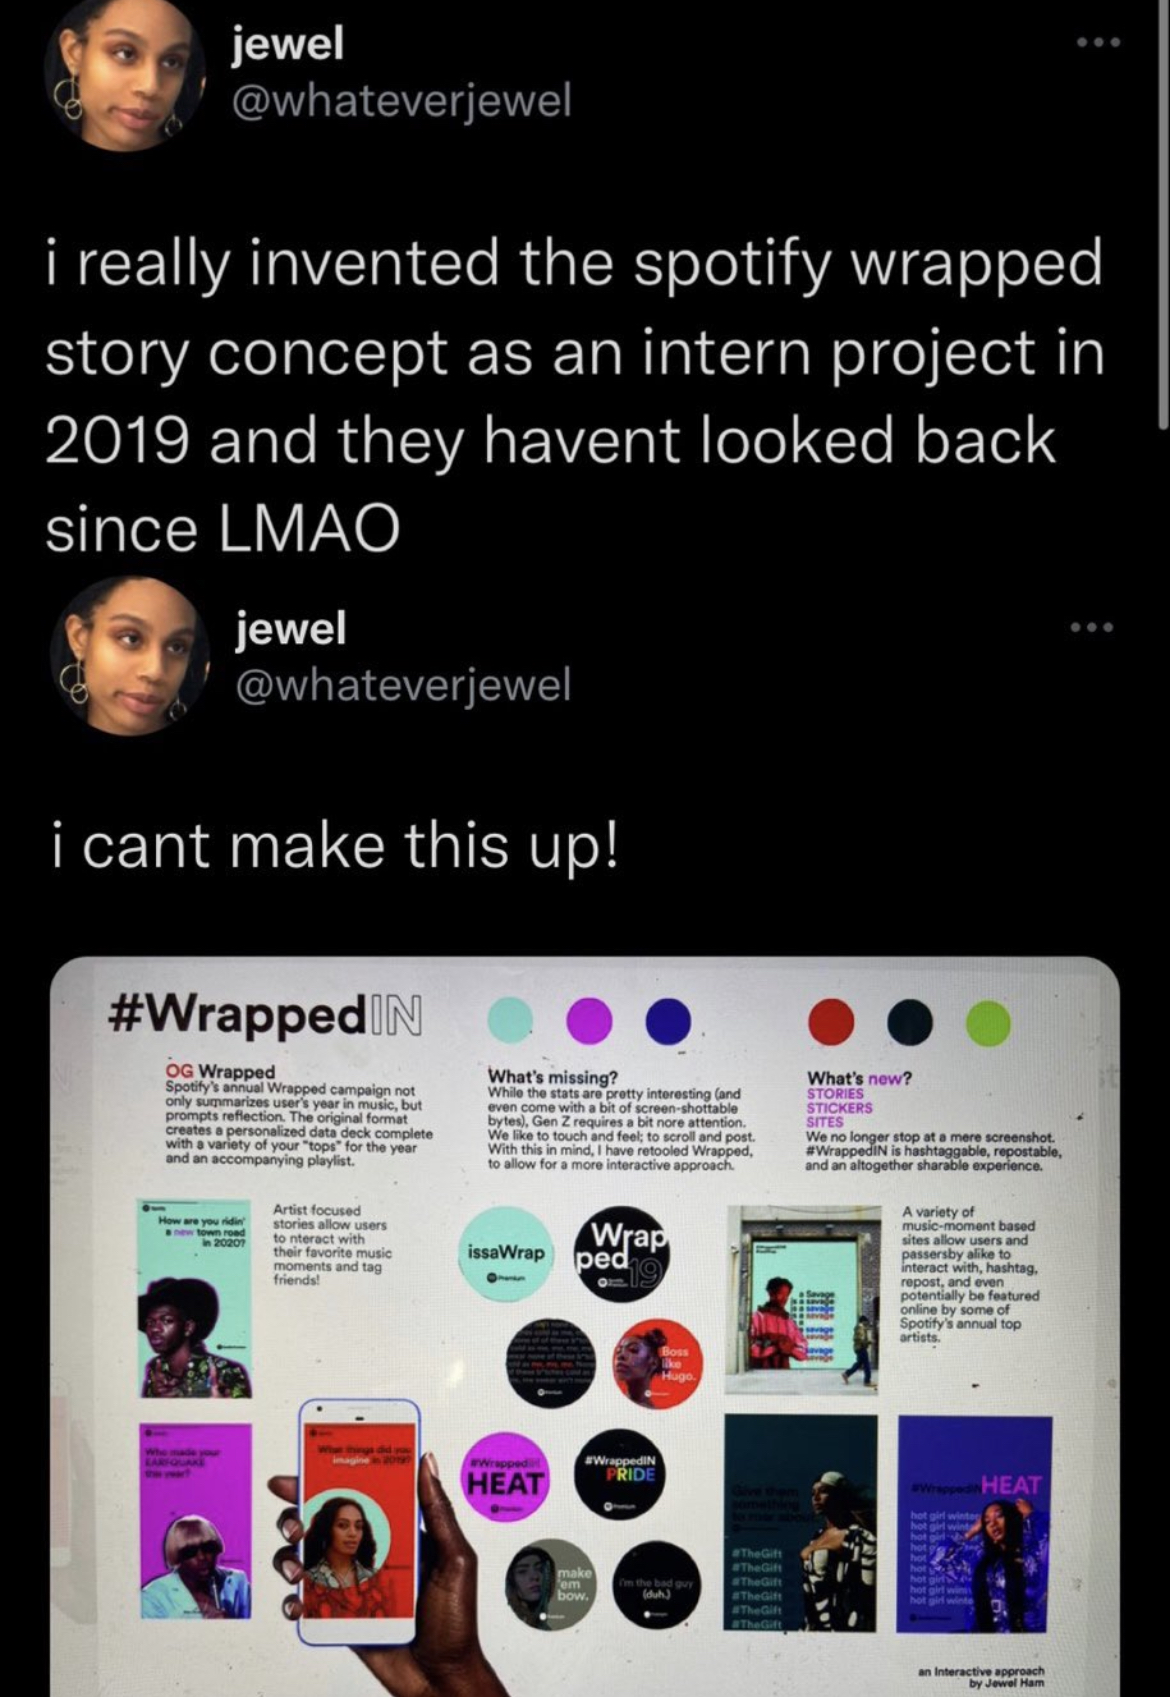 Spotify Wrapped Memes - media - jewel i really invented the spotify wrapped story concept as an intern project in 2019 and they havent looked back since Lmao jewel i cant make this up! In Og W Heat Wrap ped What's new? Heat